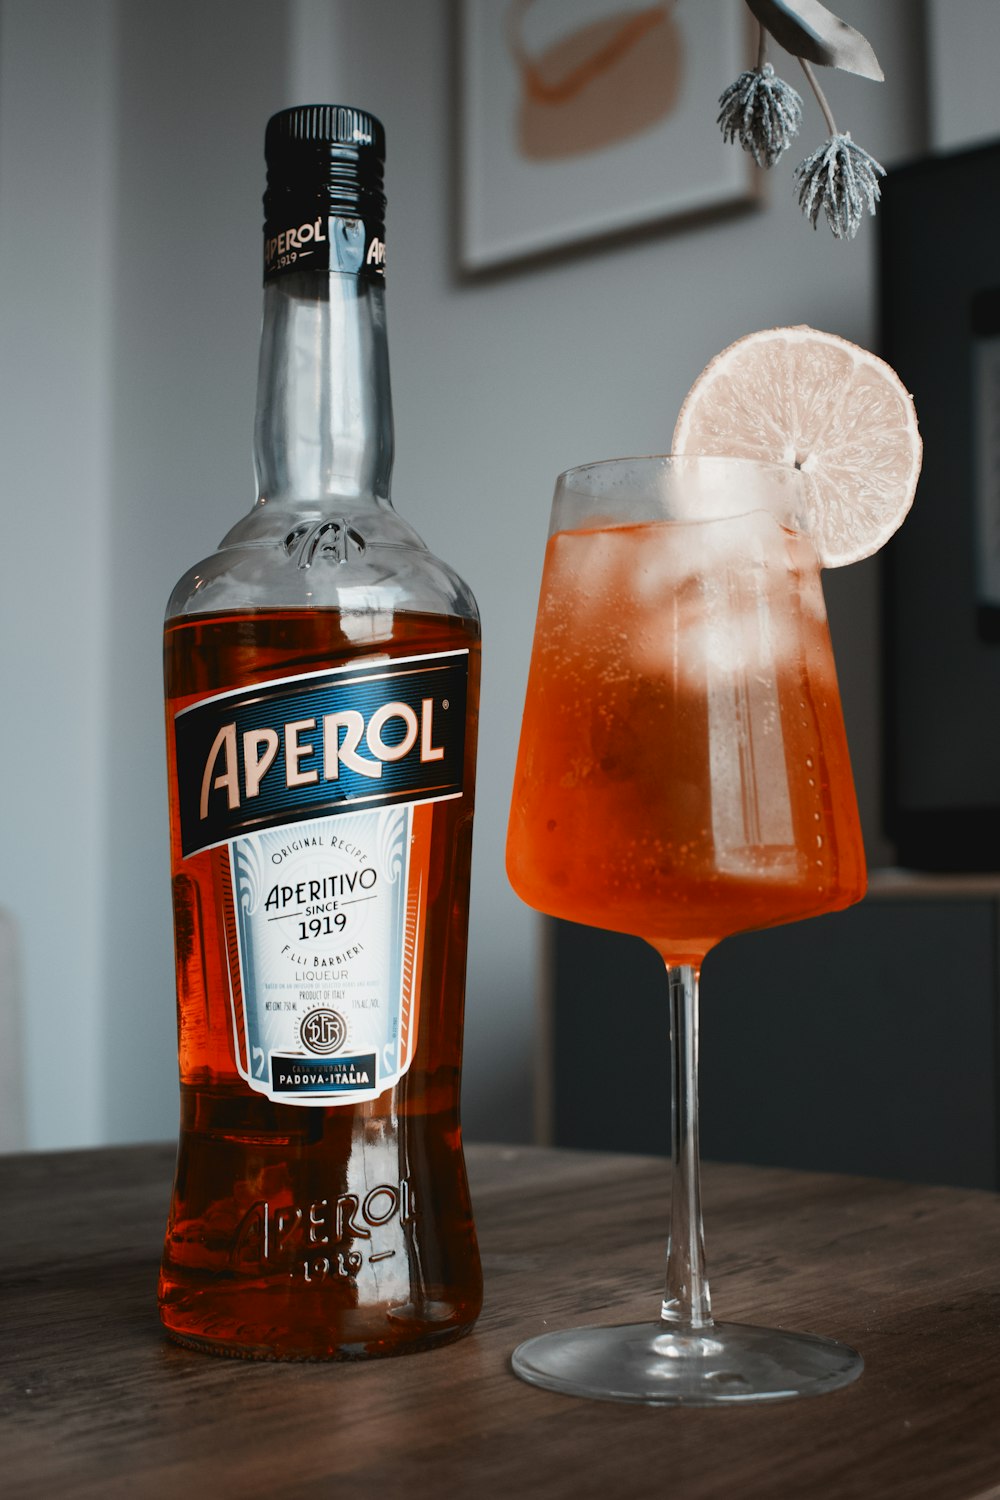 a bottle of aperol next to a glass of alcohol